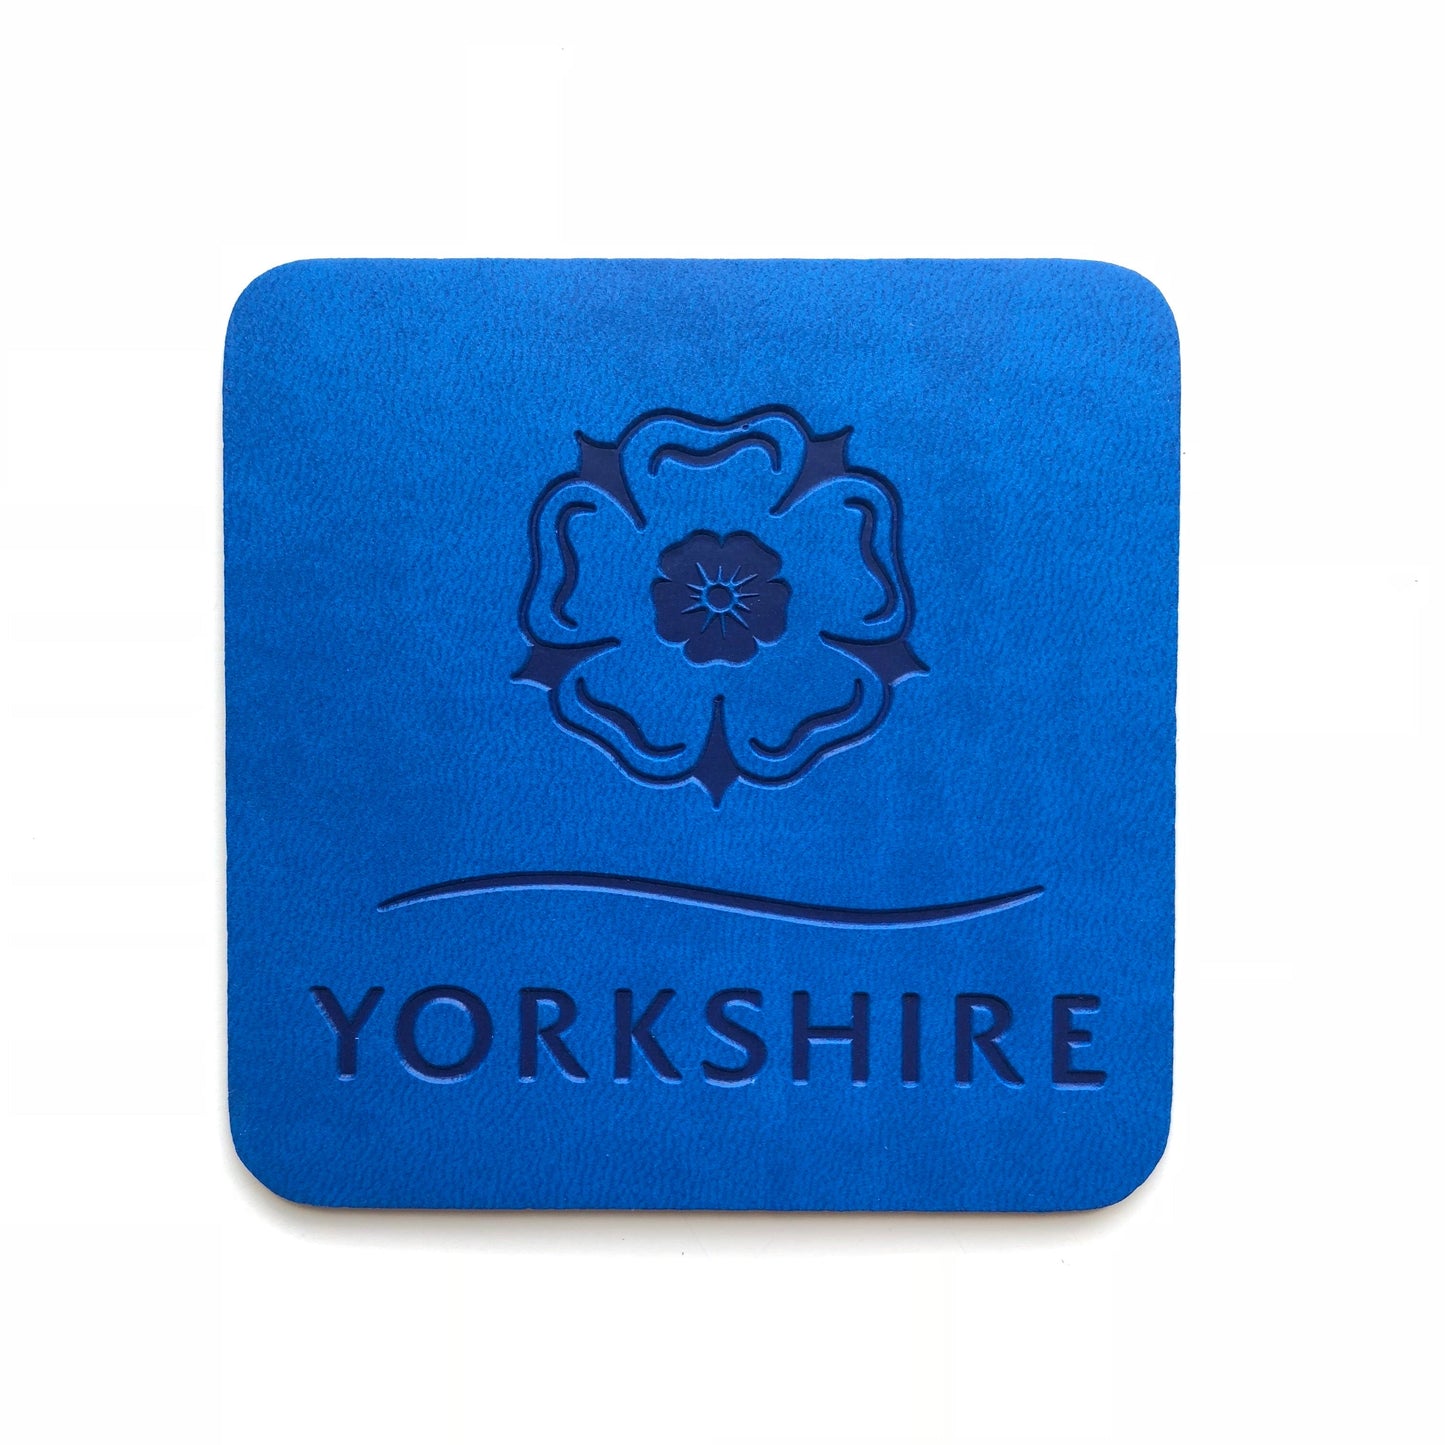 Yorkshire Embossed Coaster - The Great Yorkshire Shop